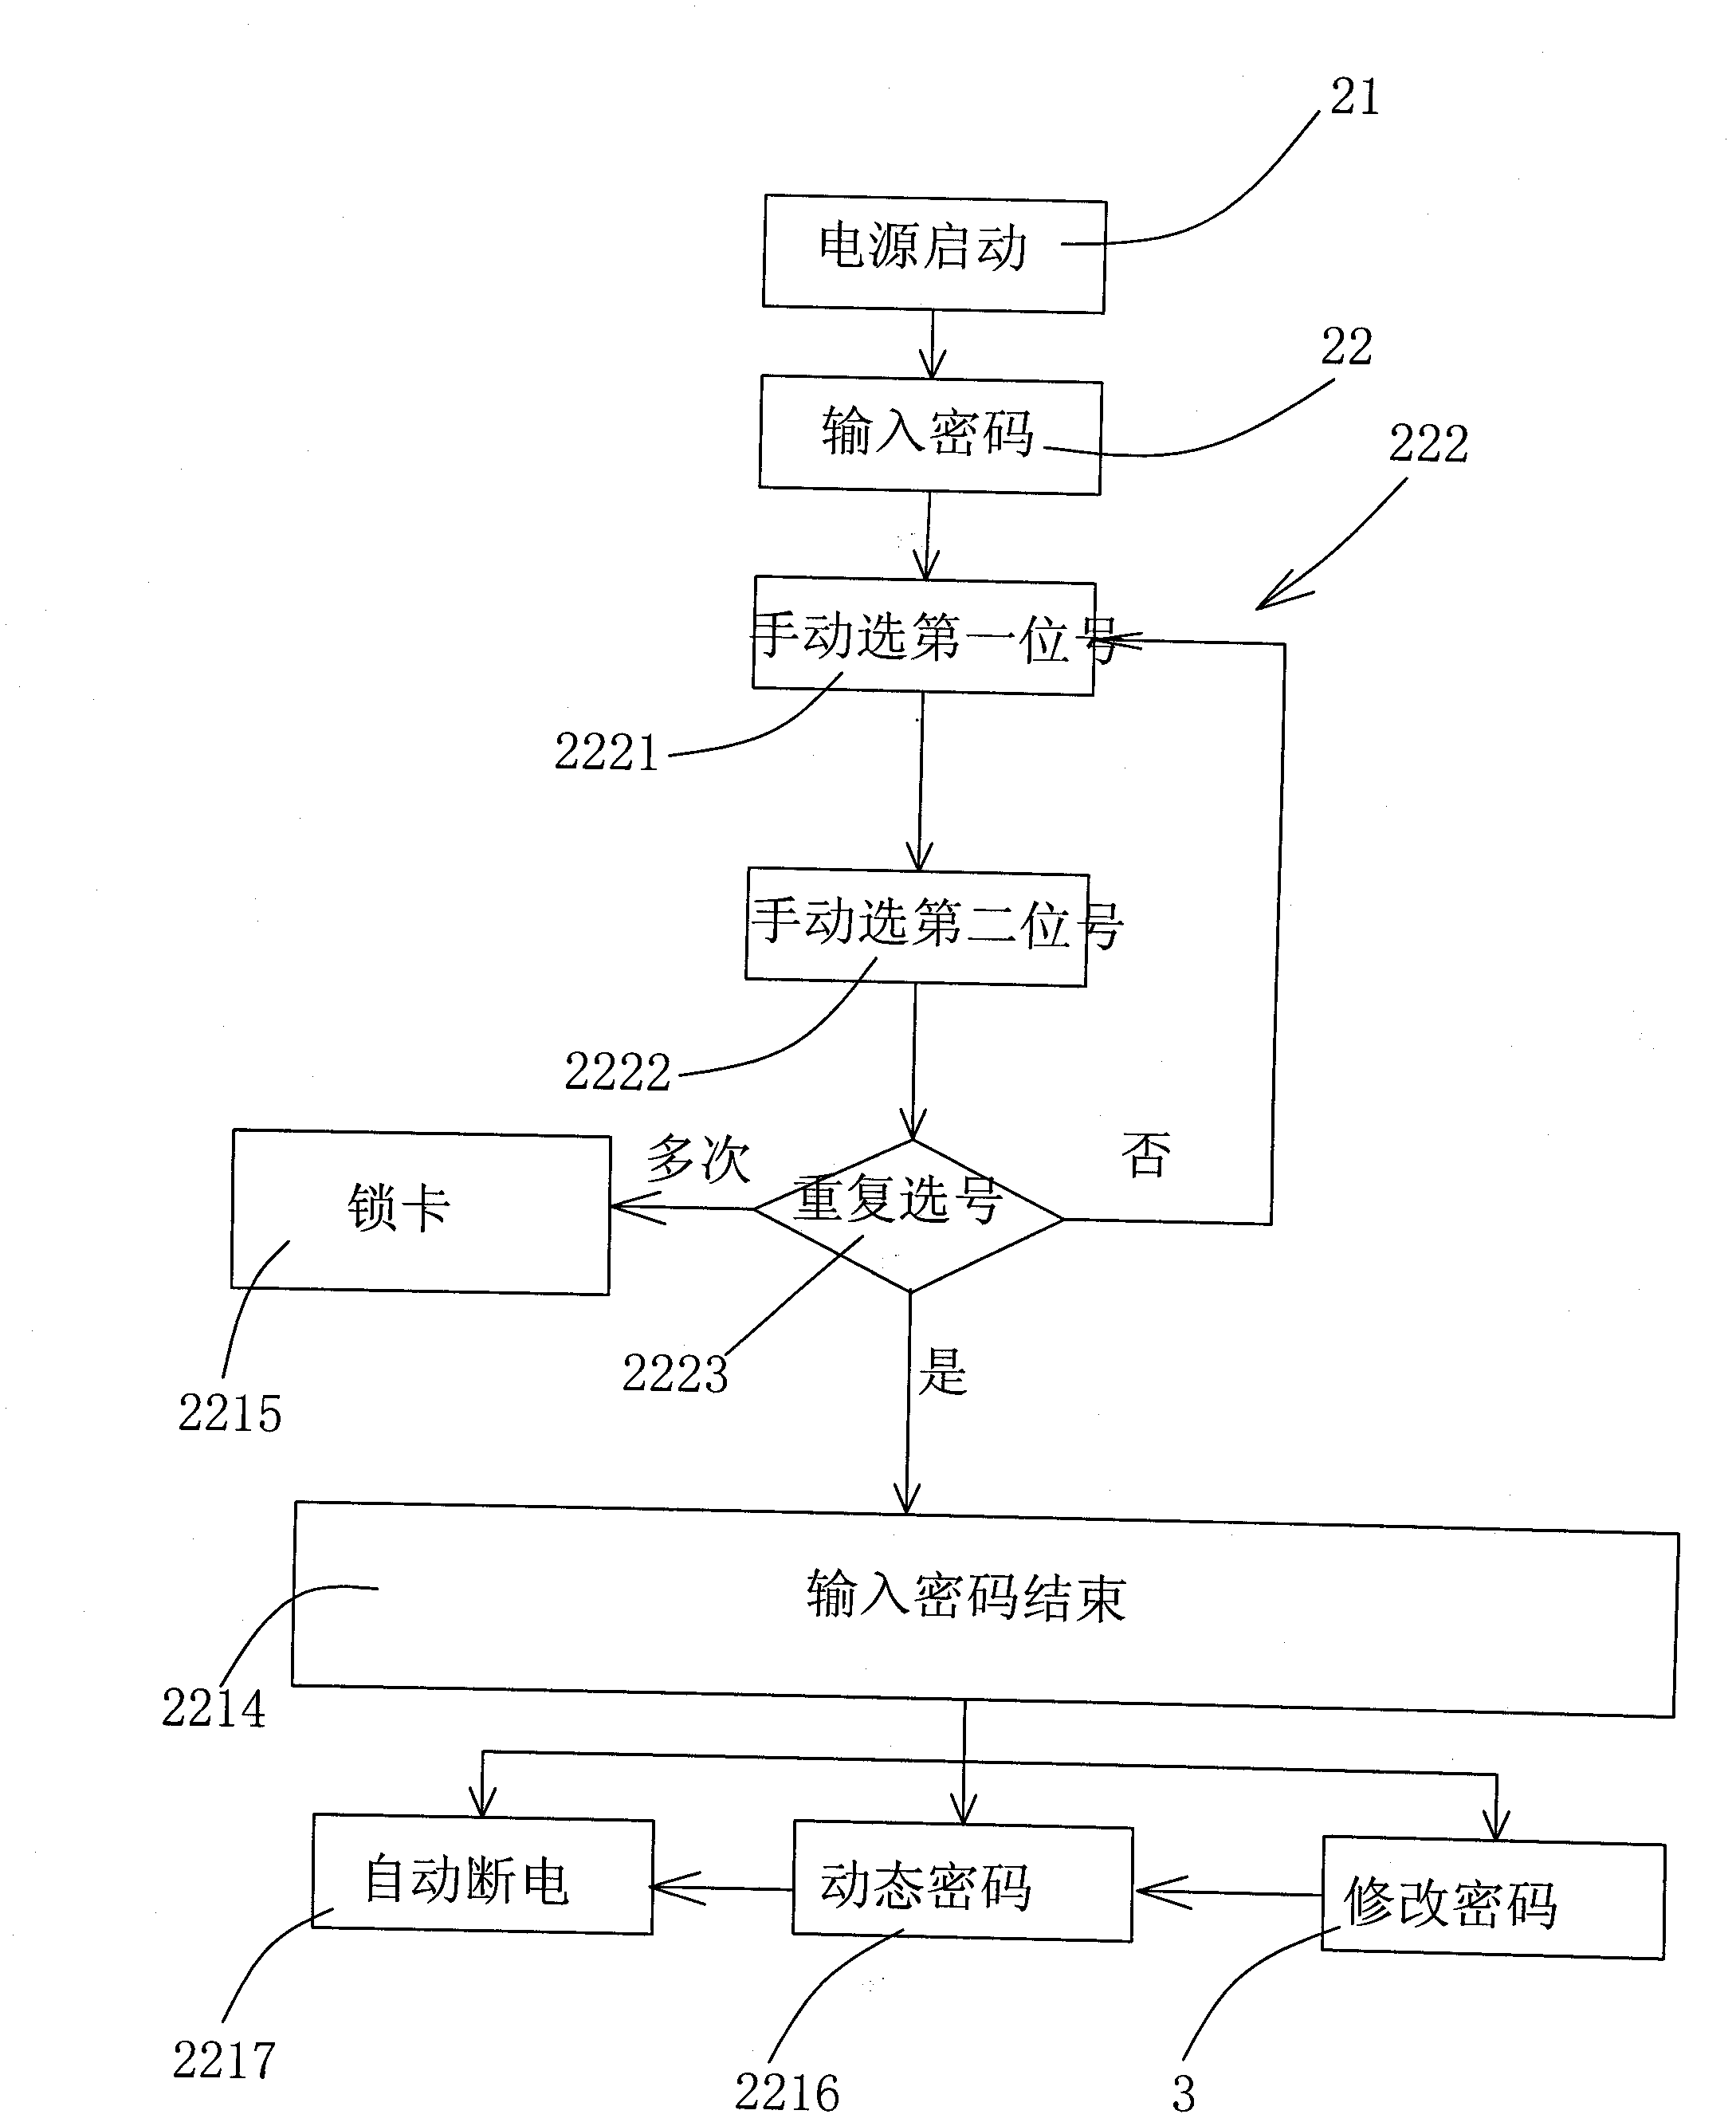 Method for inputting or presetting passwords for display screen information secrecy product by using one key, and application